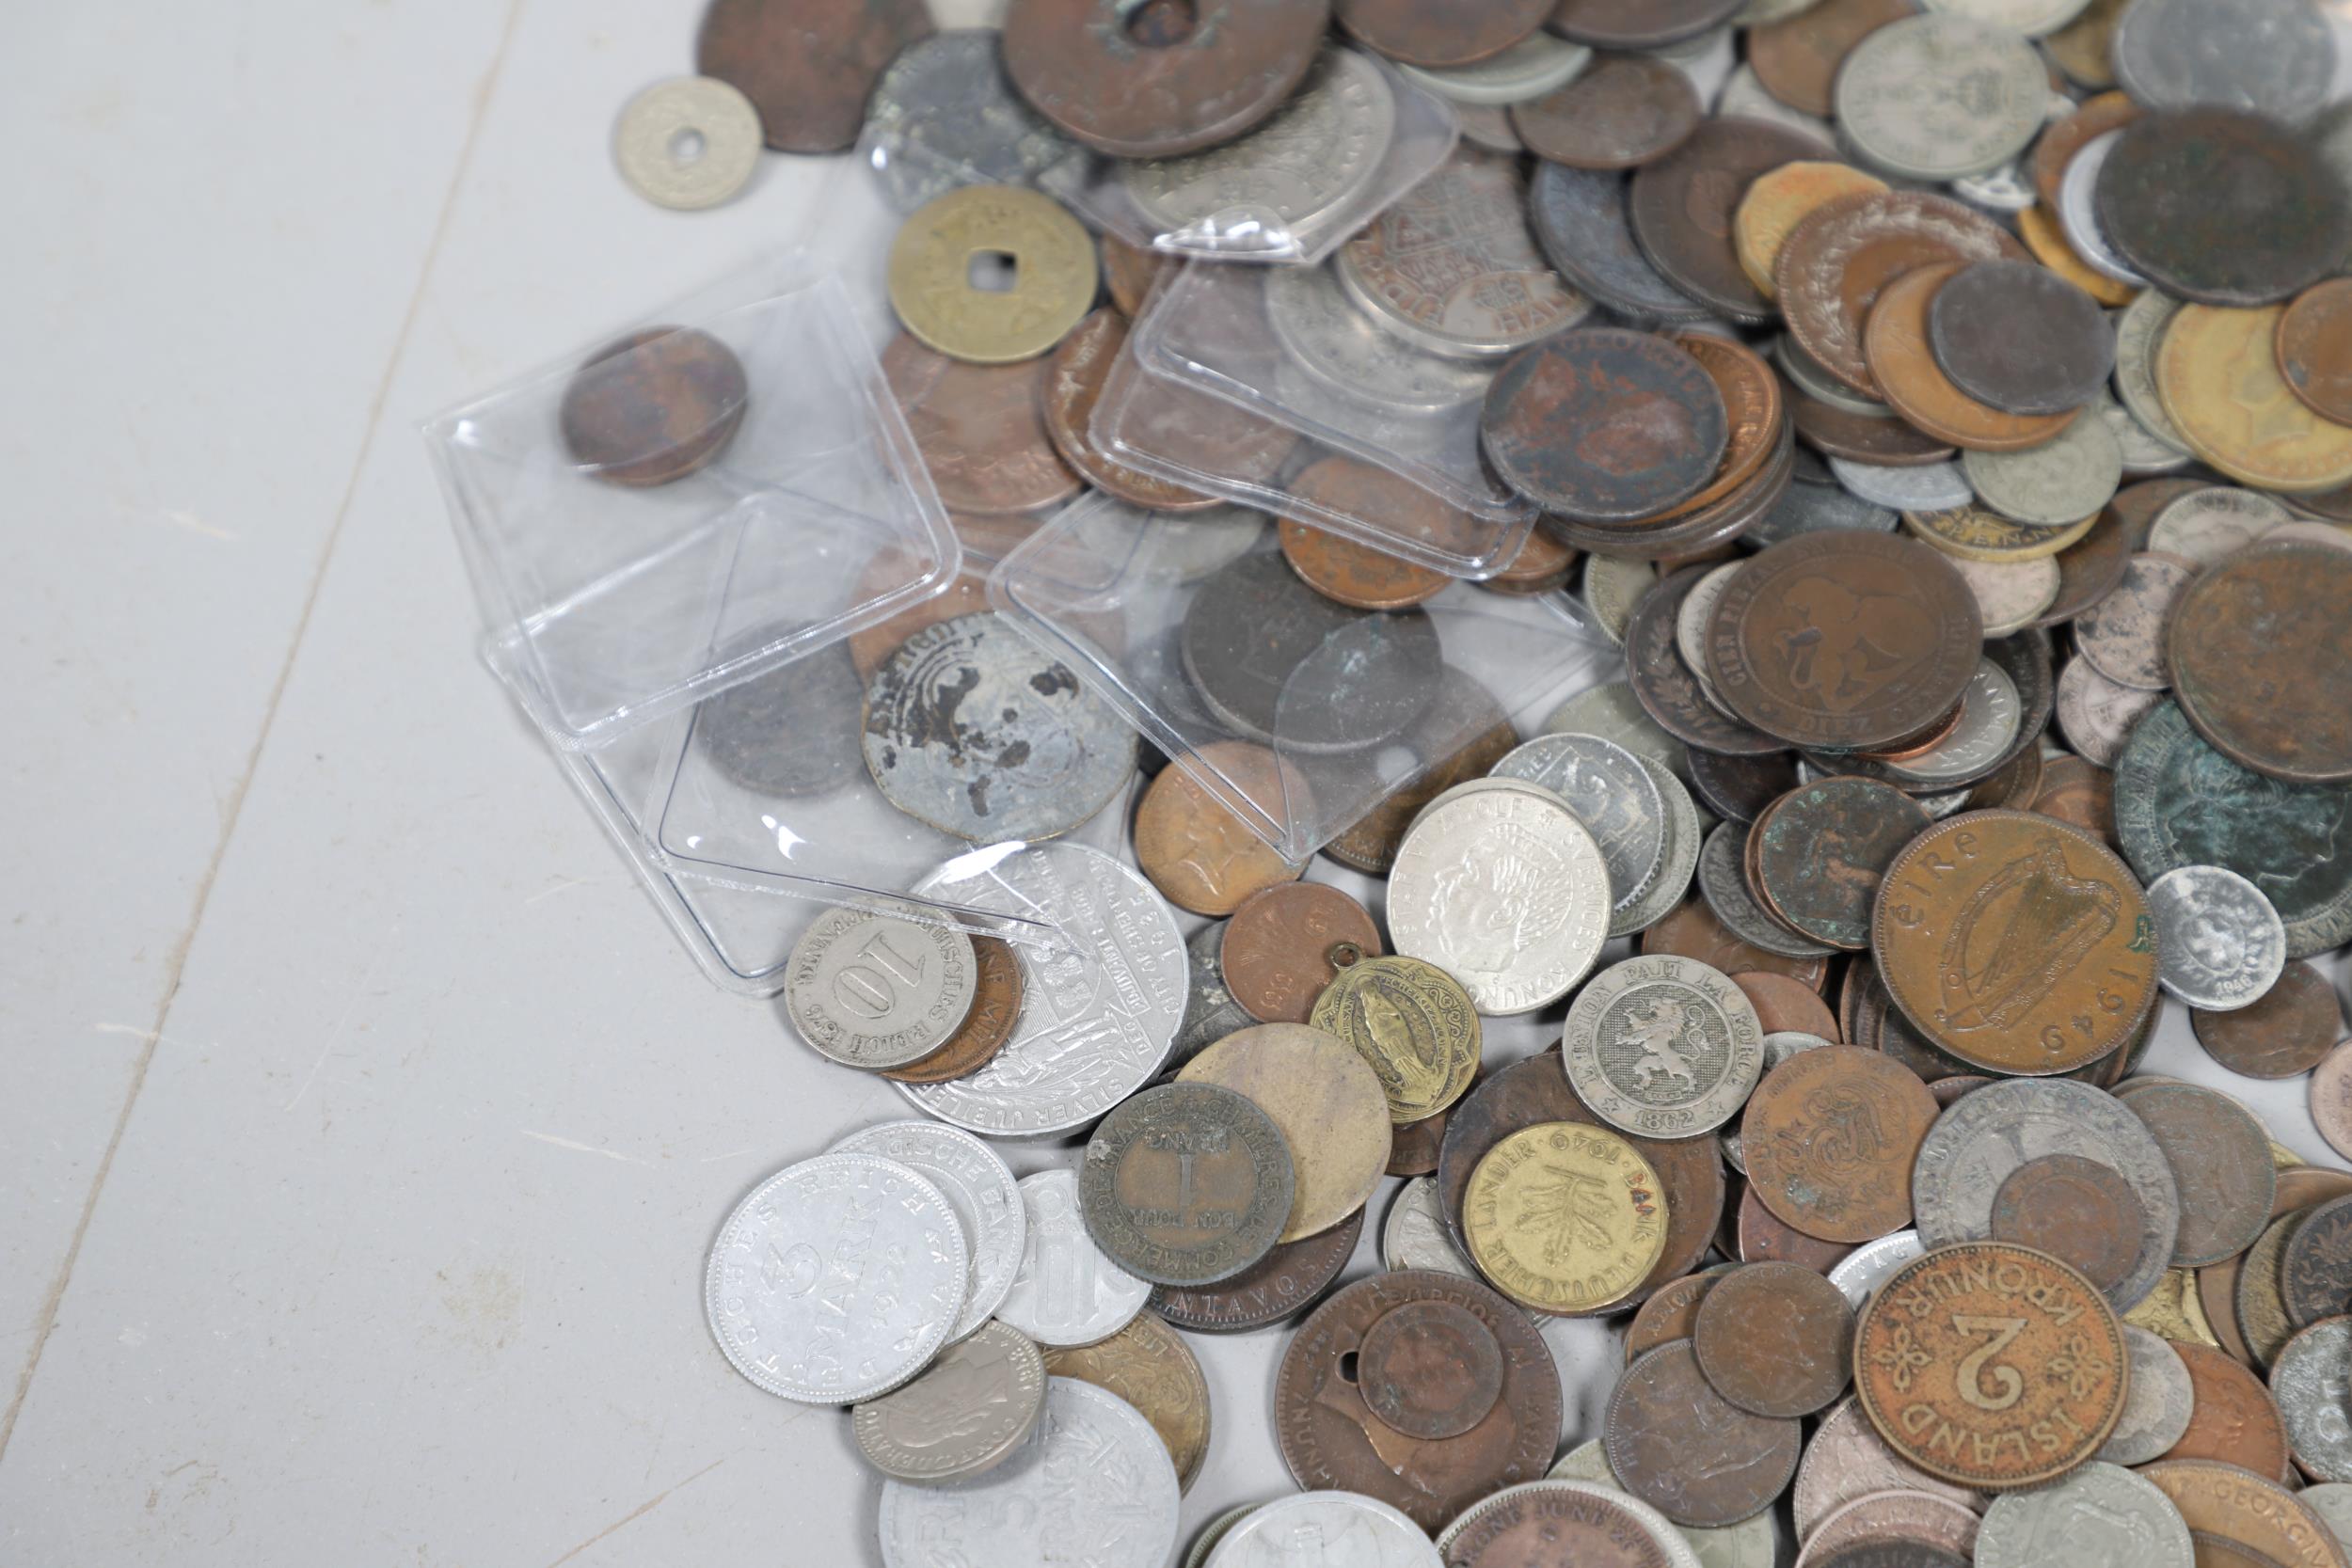 A LARGE COLLECTION OF WORLD COINS AND SIMILAR BRITISH COINS. - Image 8 of 20